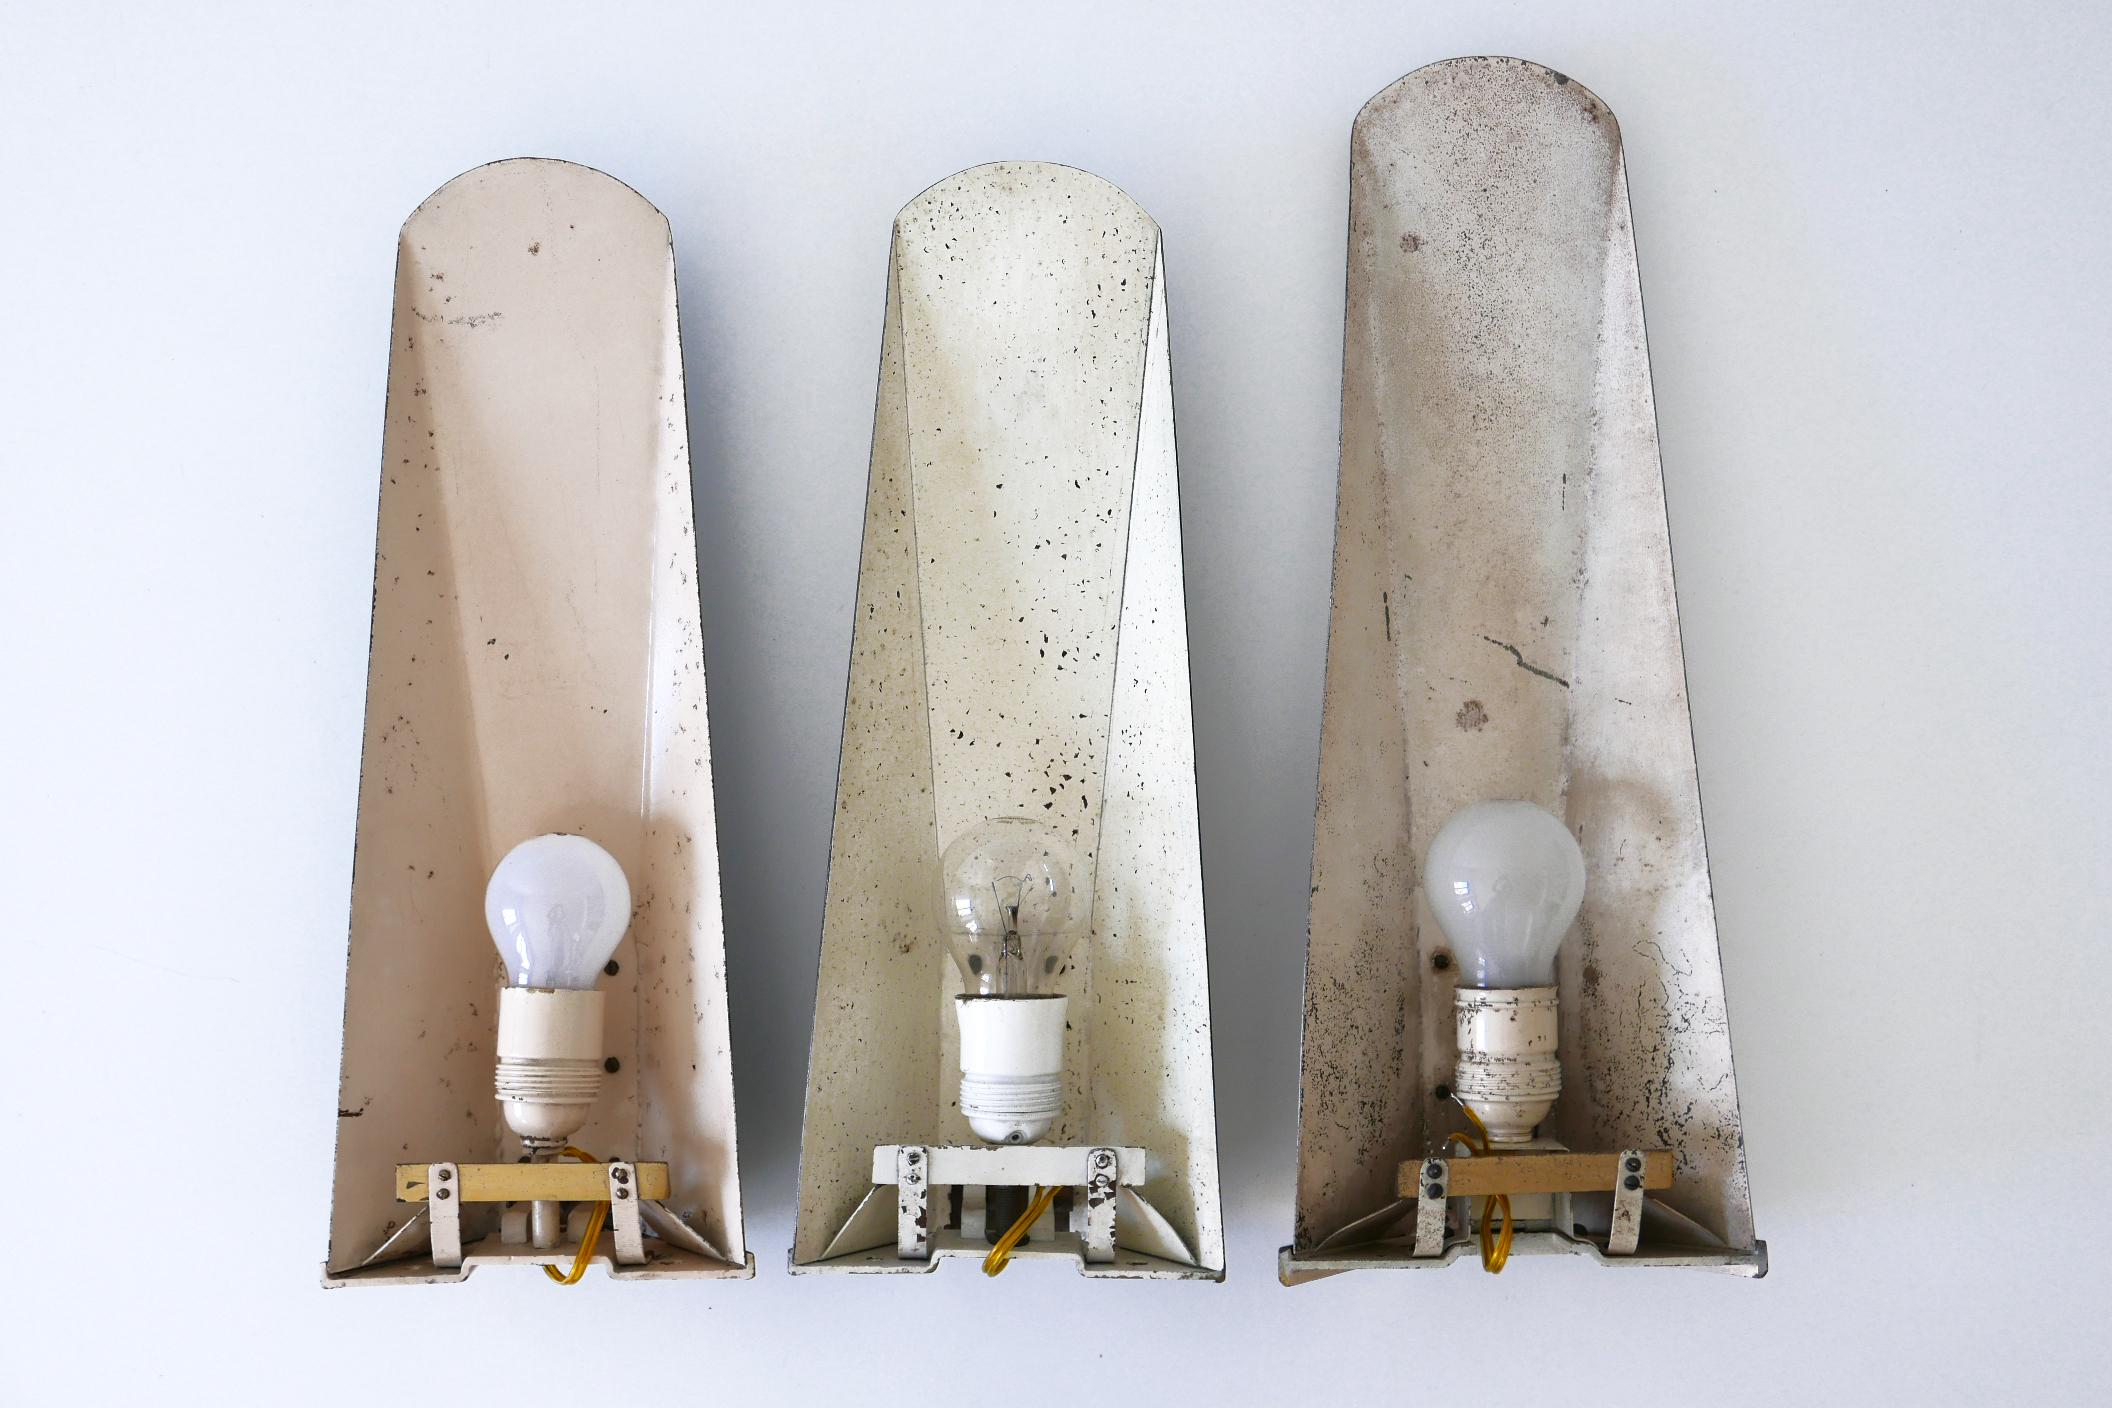 Set of Three Large Mid-Century Modern Wall Lamps or Sconces, 1950s, Germany For Sale 9